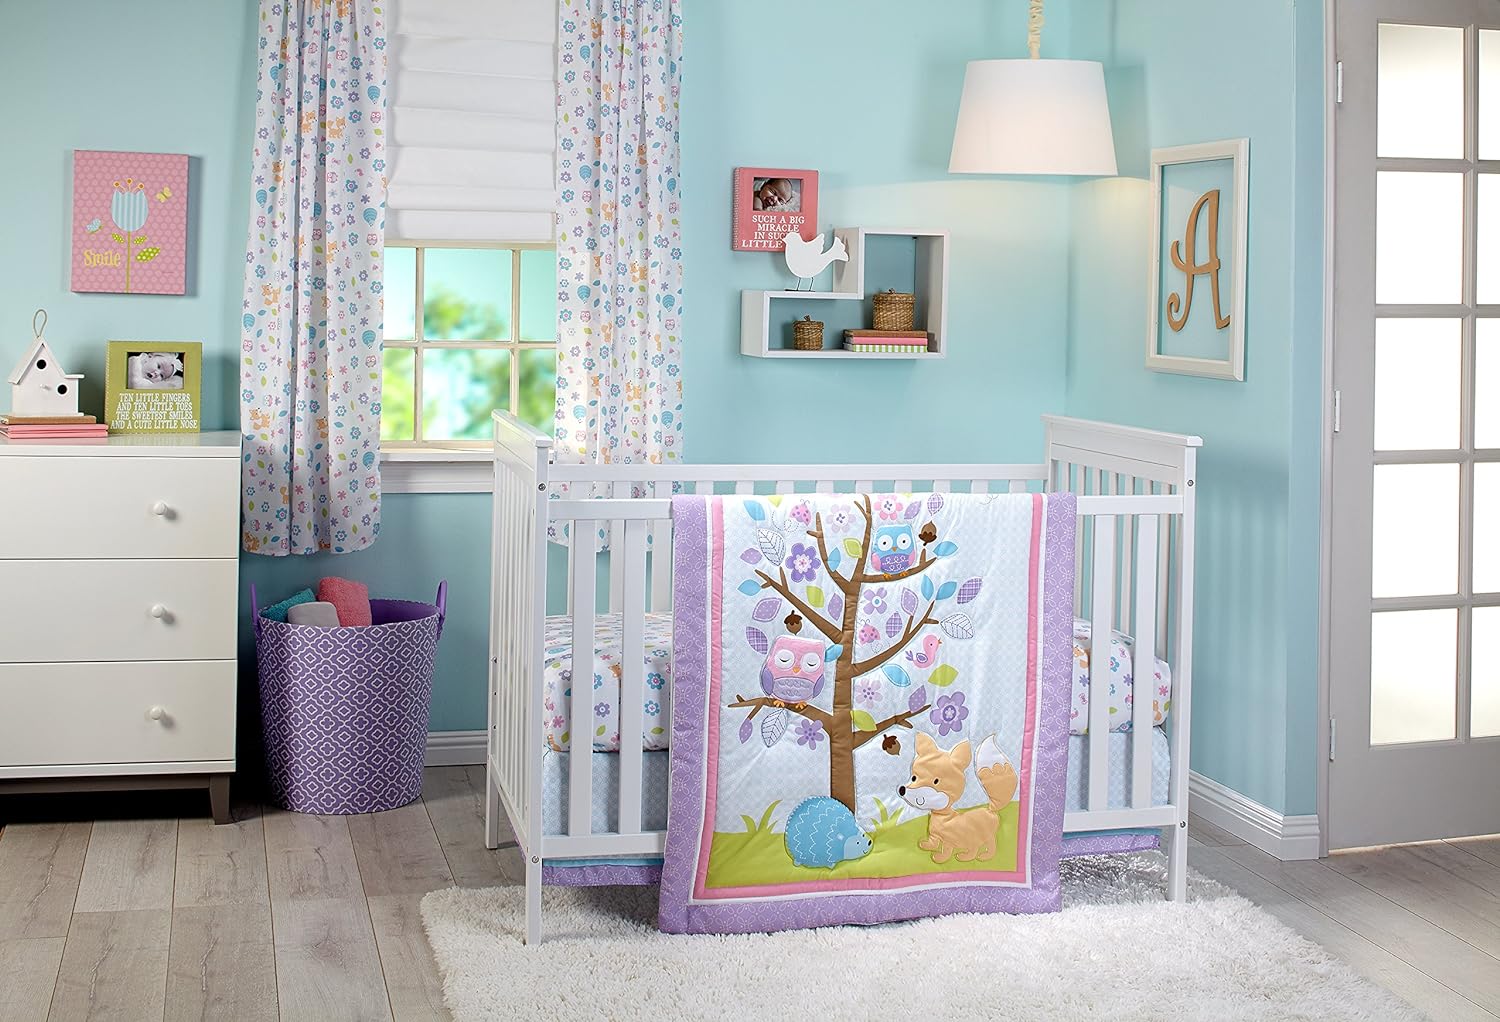 NoJo Little Love Adorable Orchard 3 Piece Set: A Delightful Addition to Your Baby’s Nursery